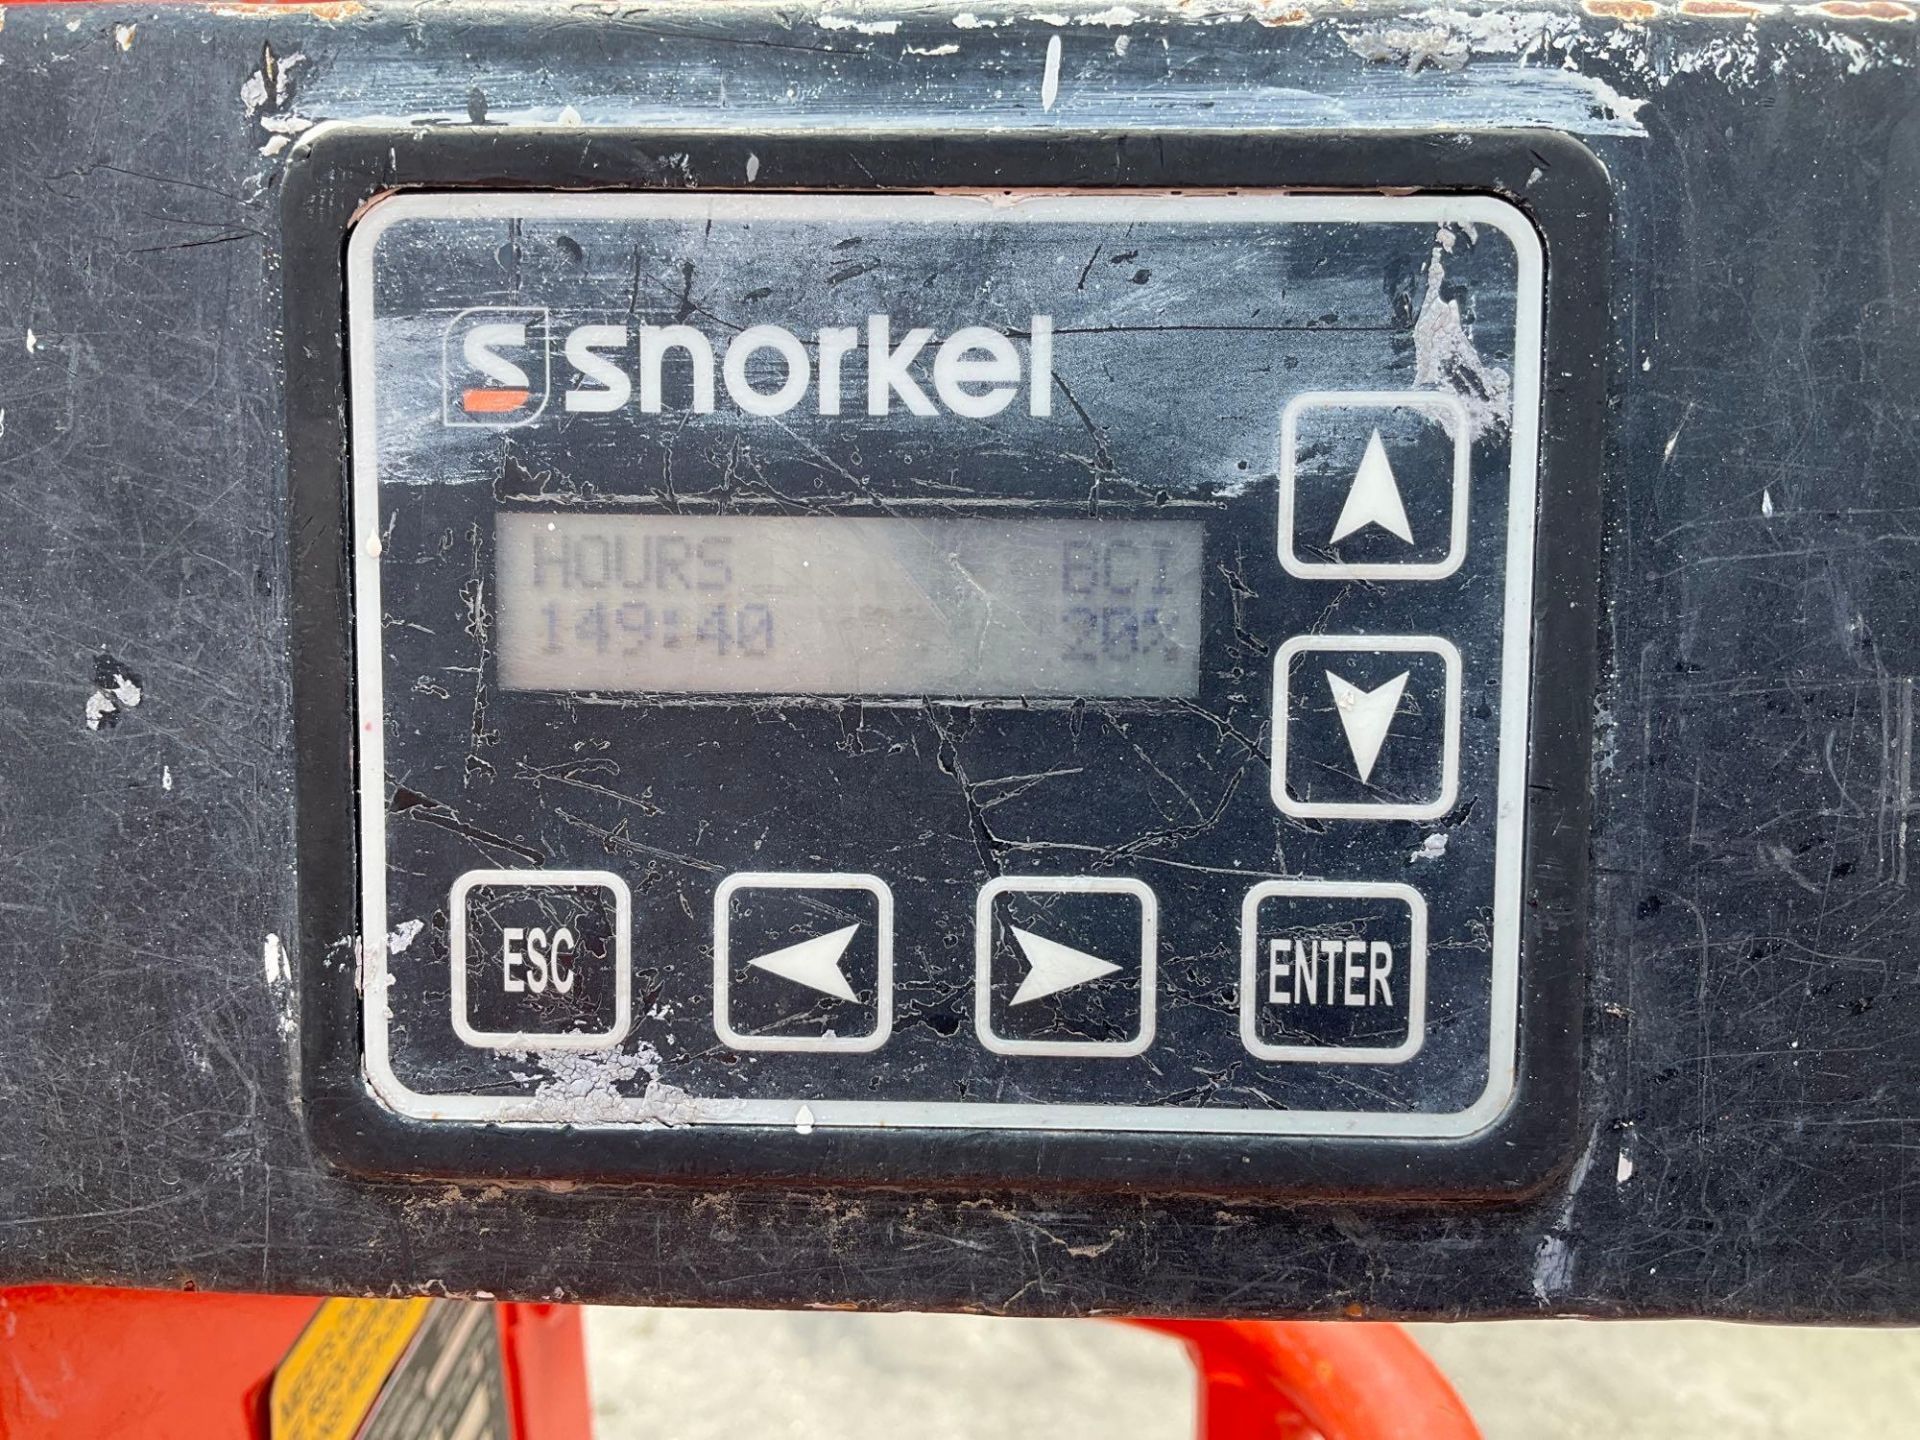 2014 SNORKEL MAN LIFT MODEL TM12 , ELECTRIC, APPROX MAX PLATFORM HEIGHT 12FT, NON MARKING TIRES, - Image 10 of 14